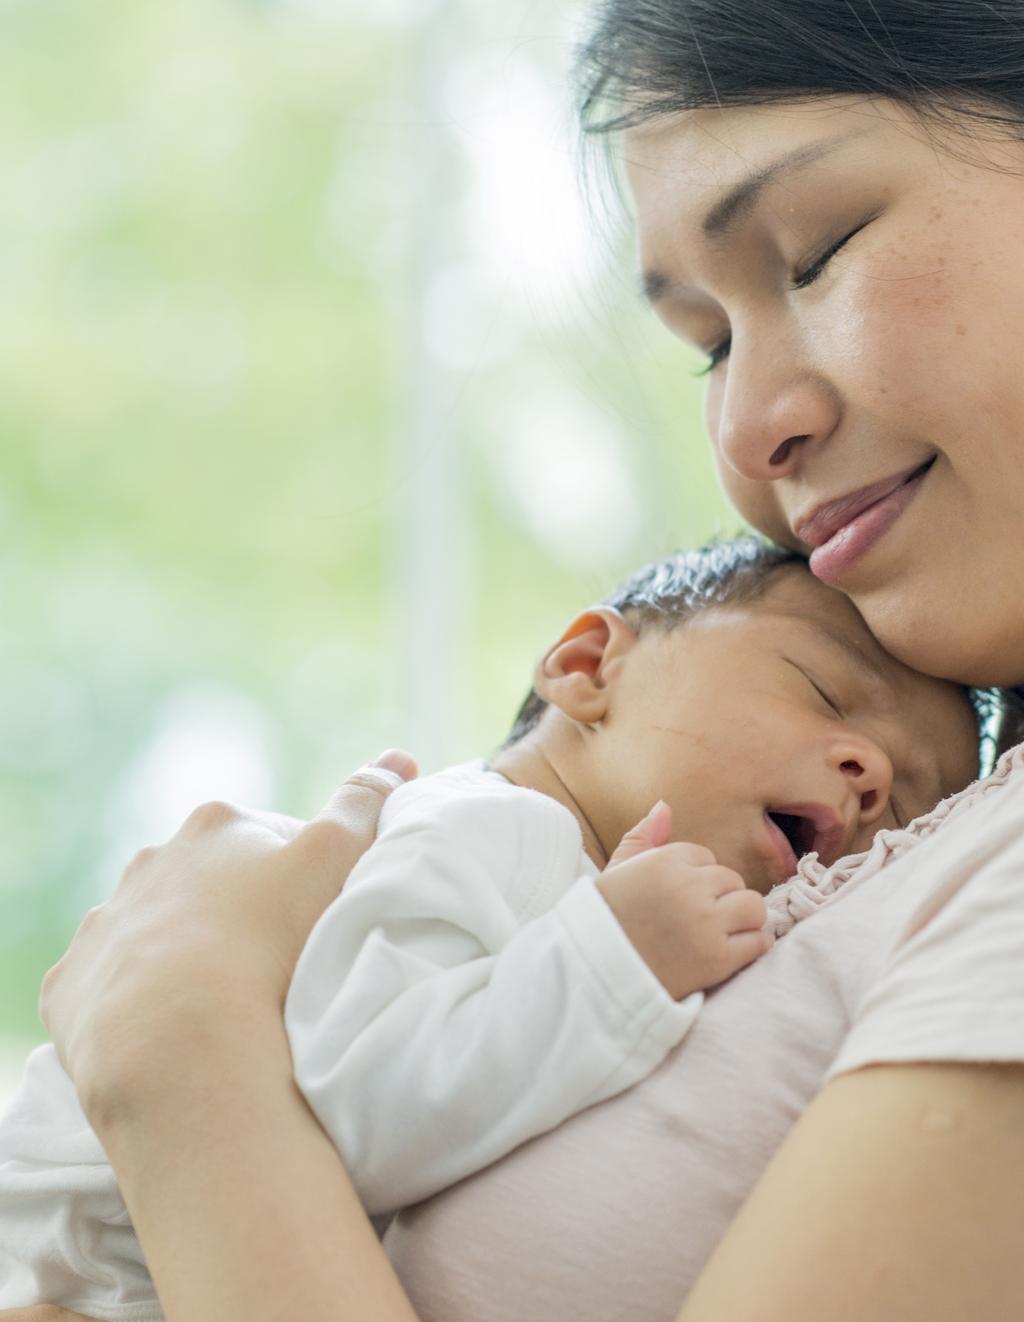 MATERNAL DEPRESSION First steps families & advocates can take to help mothers and babies thrive Depression is a common disorder that many mothers face.